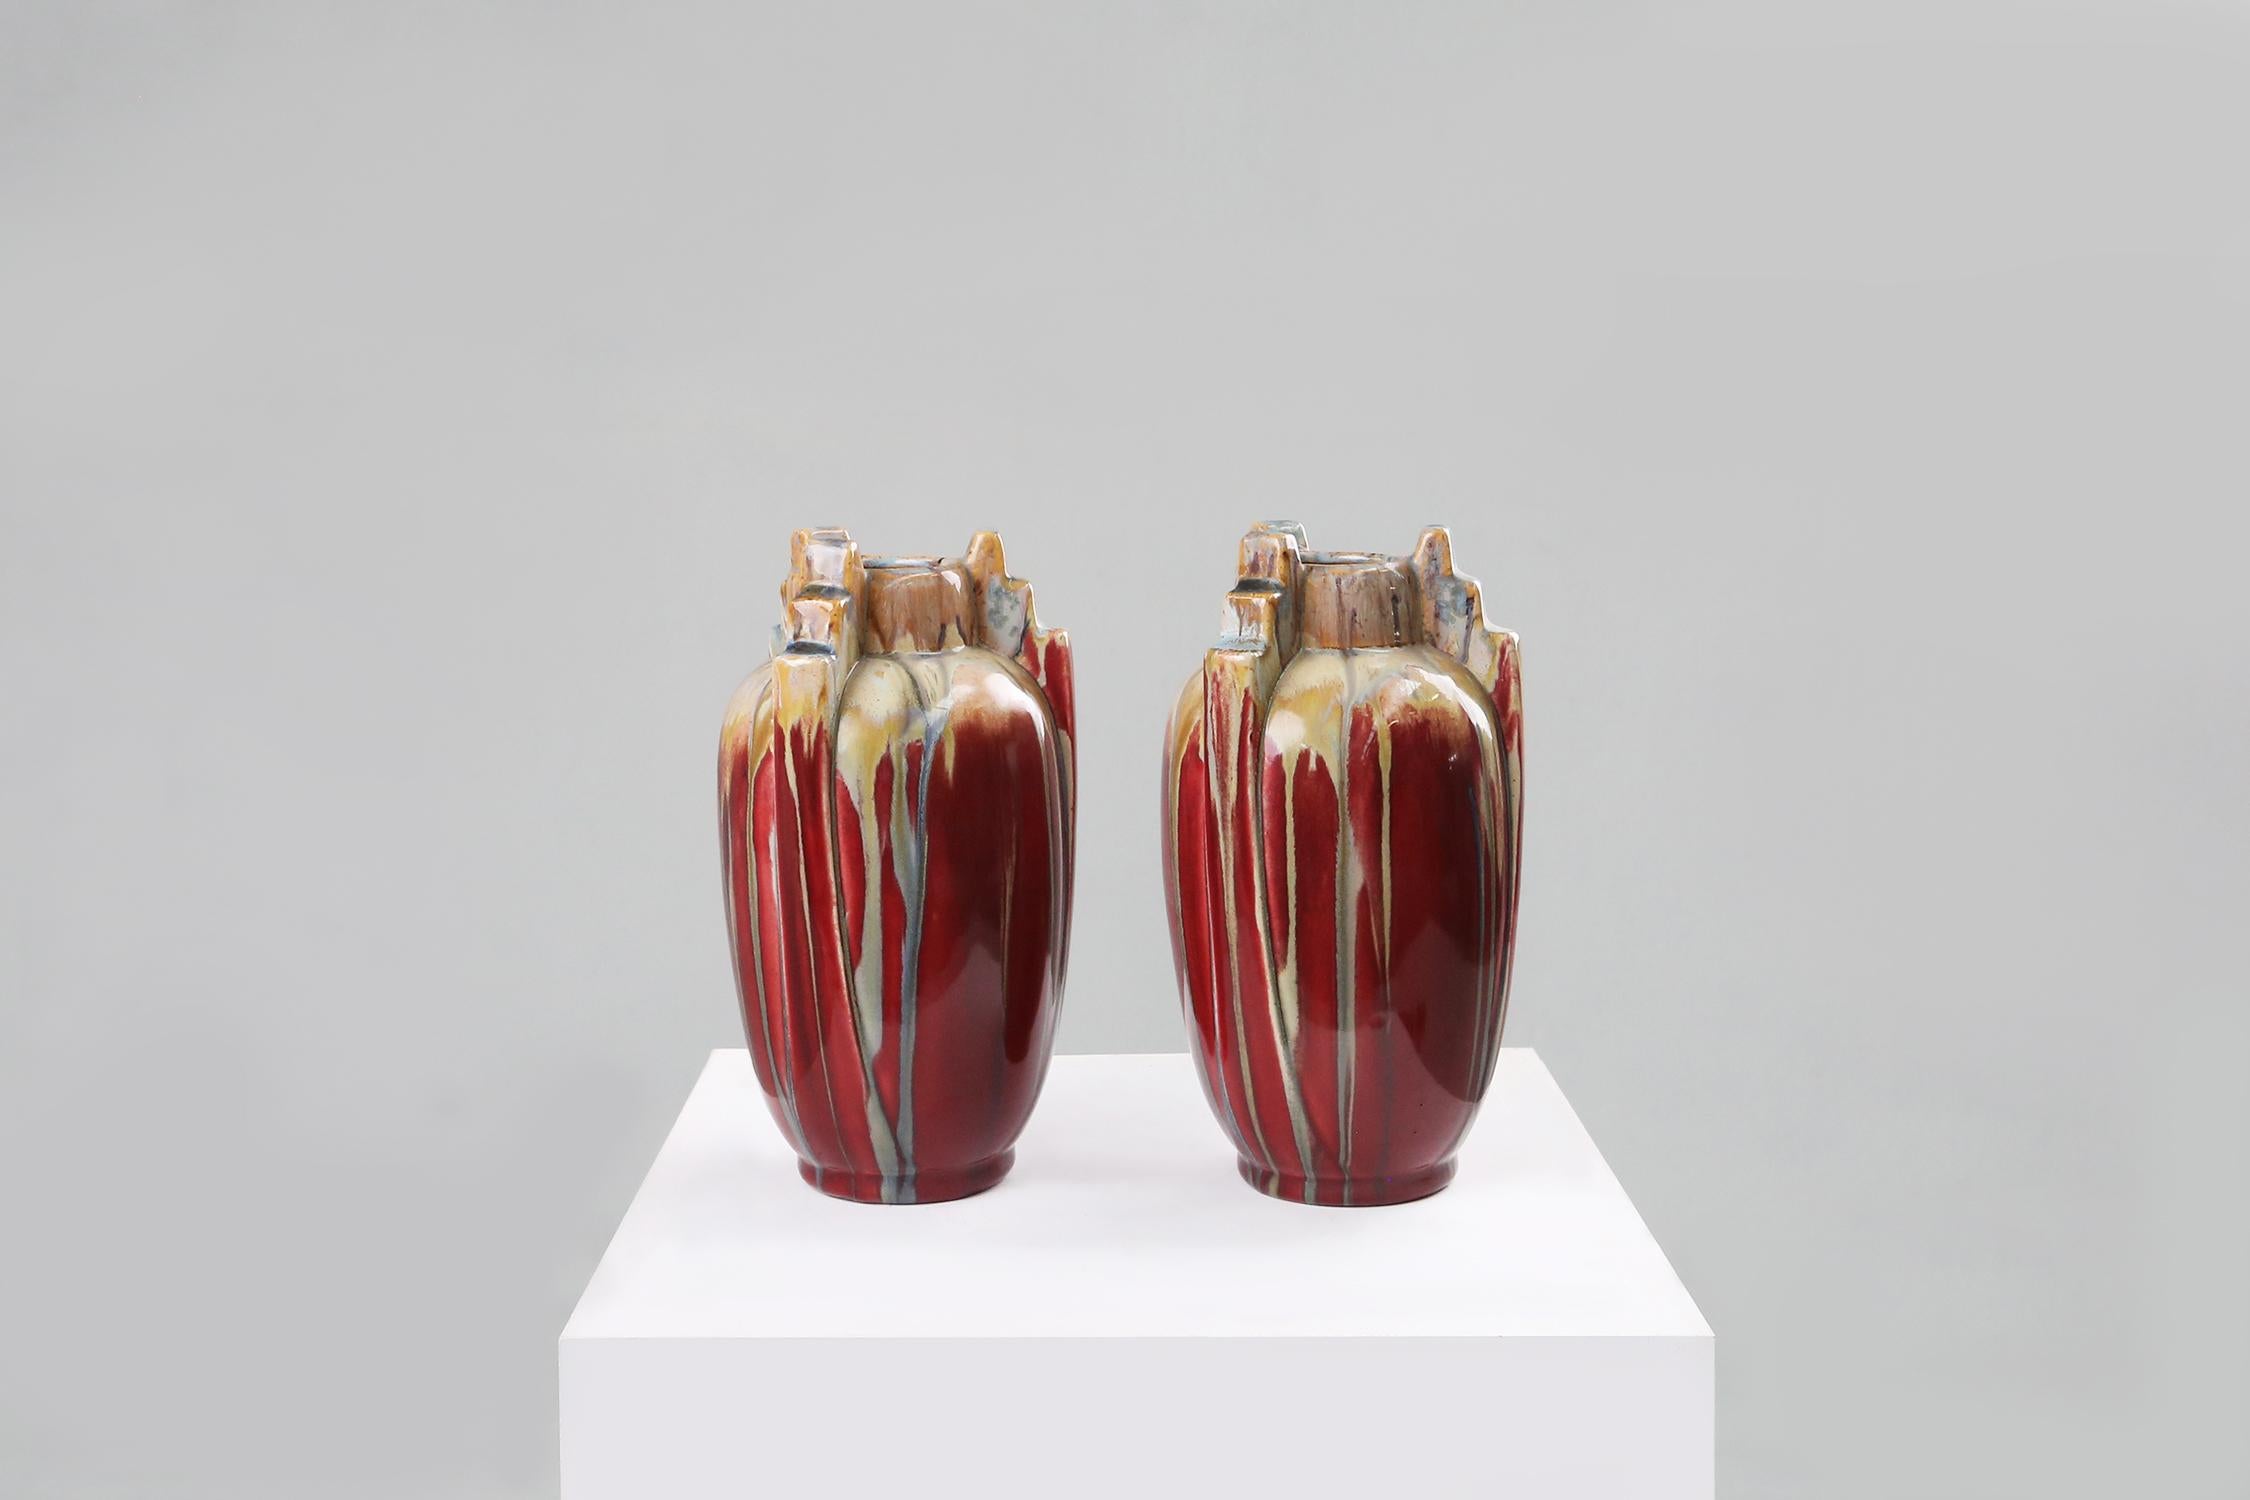 Set of Art Deco vases made in ceramic with great colors of red, brown, yellow.
Has the beautiful geometric details that really represents the Art Deco period of the 1930.